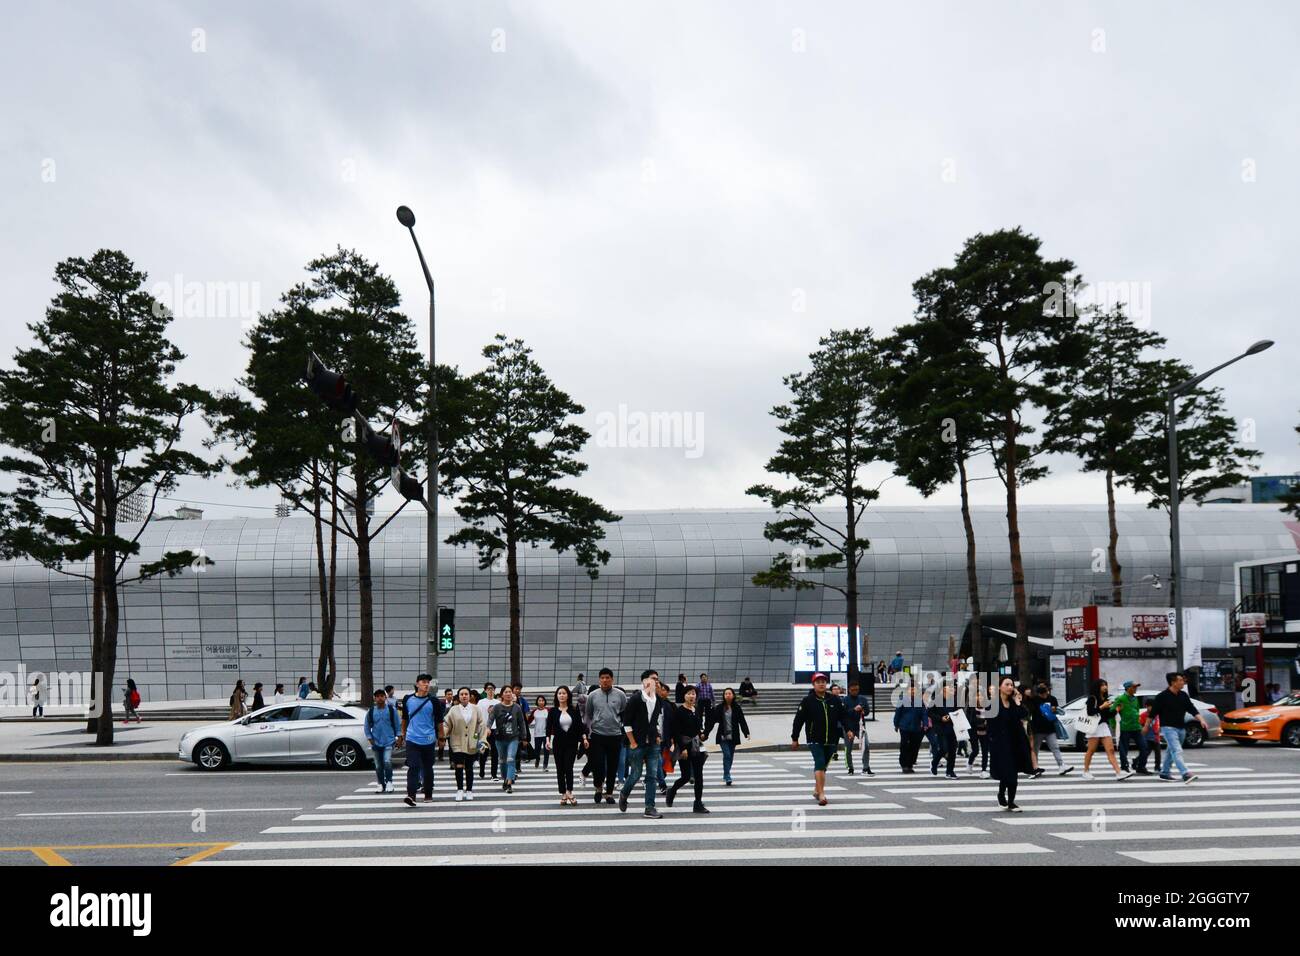 Pedestrians crossing the road in front of the The iconic Dongdaemun Design Plaza in Seoul, Korea. Stock Photo